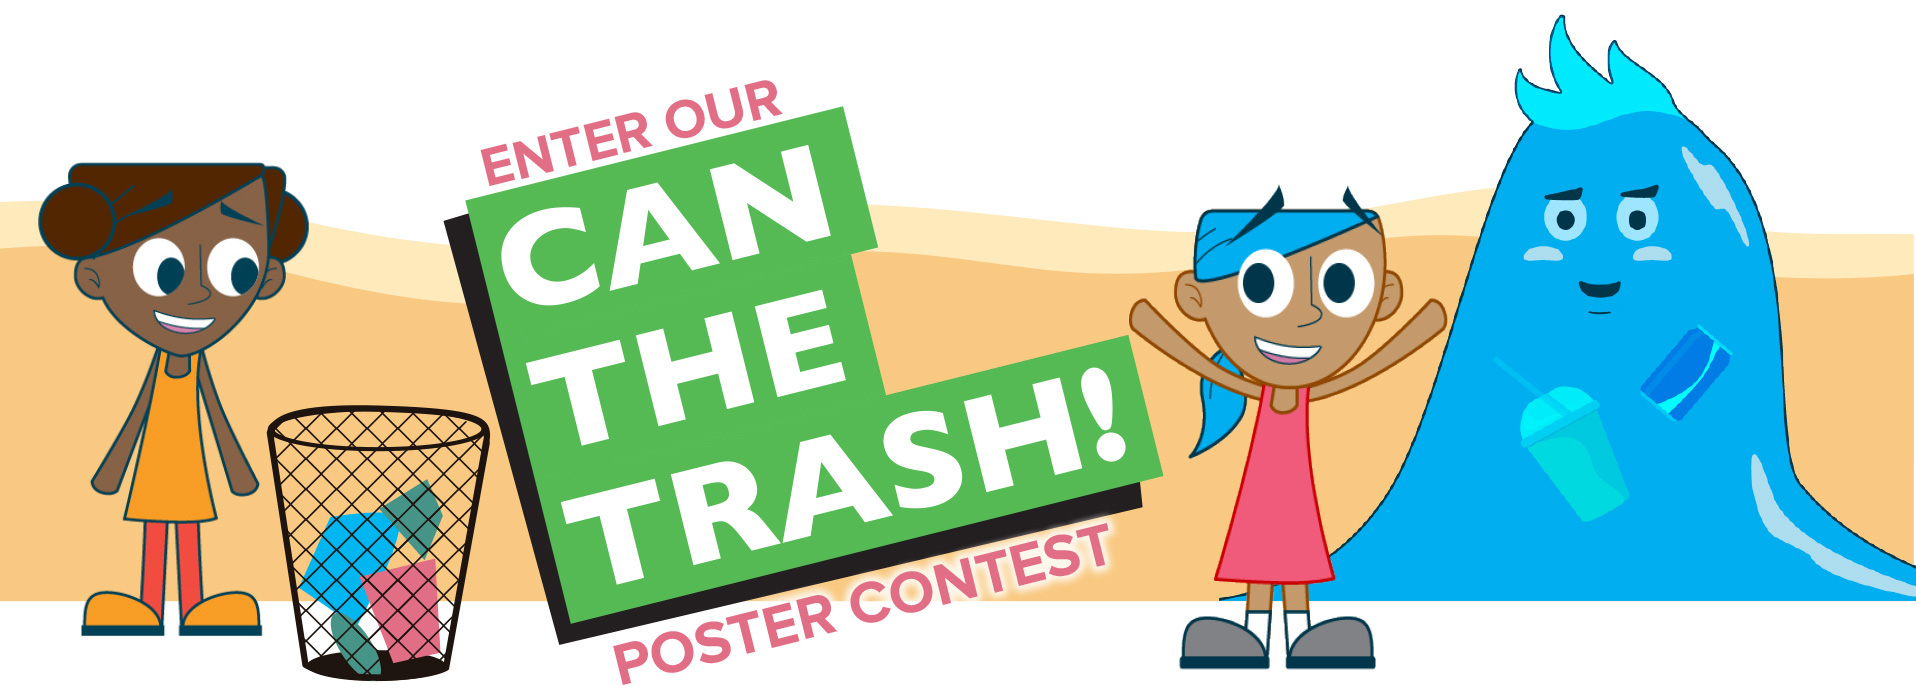 Can the Trash Clean Beach poster contest